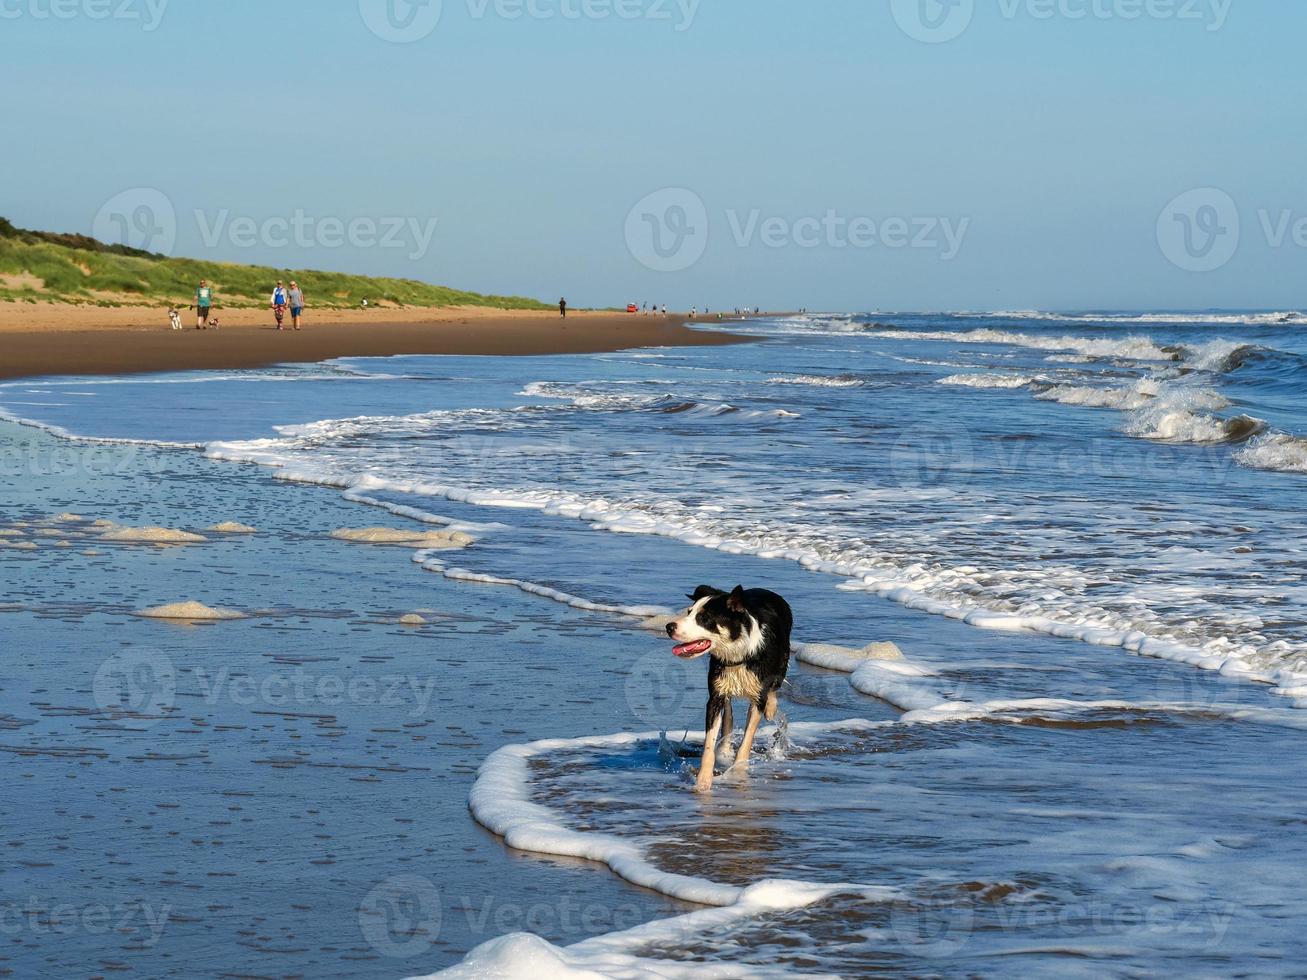 Cane sguazzare in mare a Mablethorpe Beach, Lincolnshire, Inghilterra foto